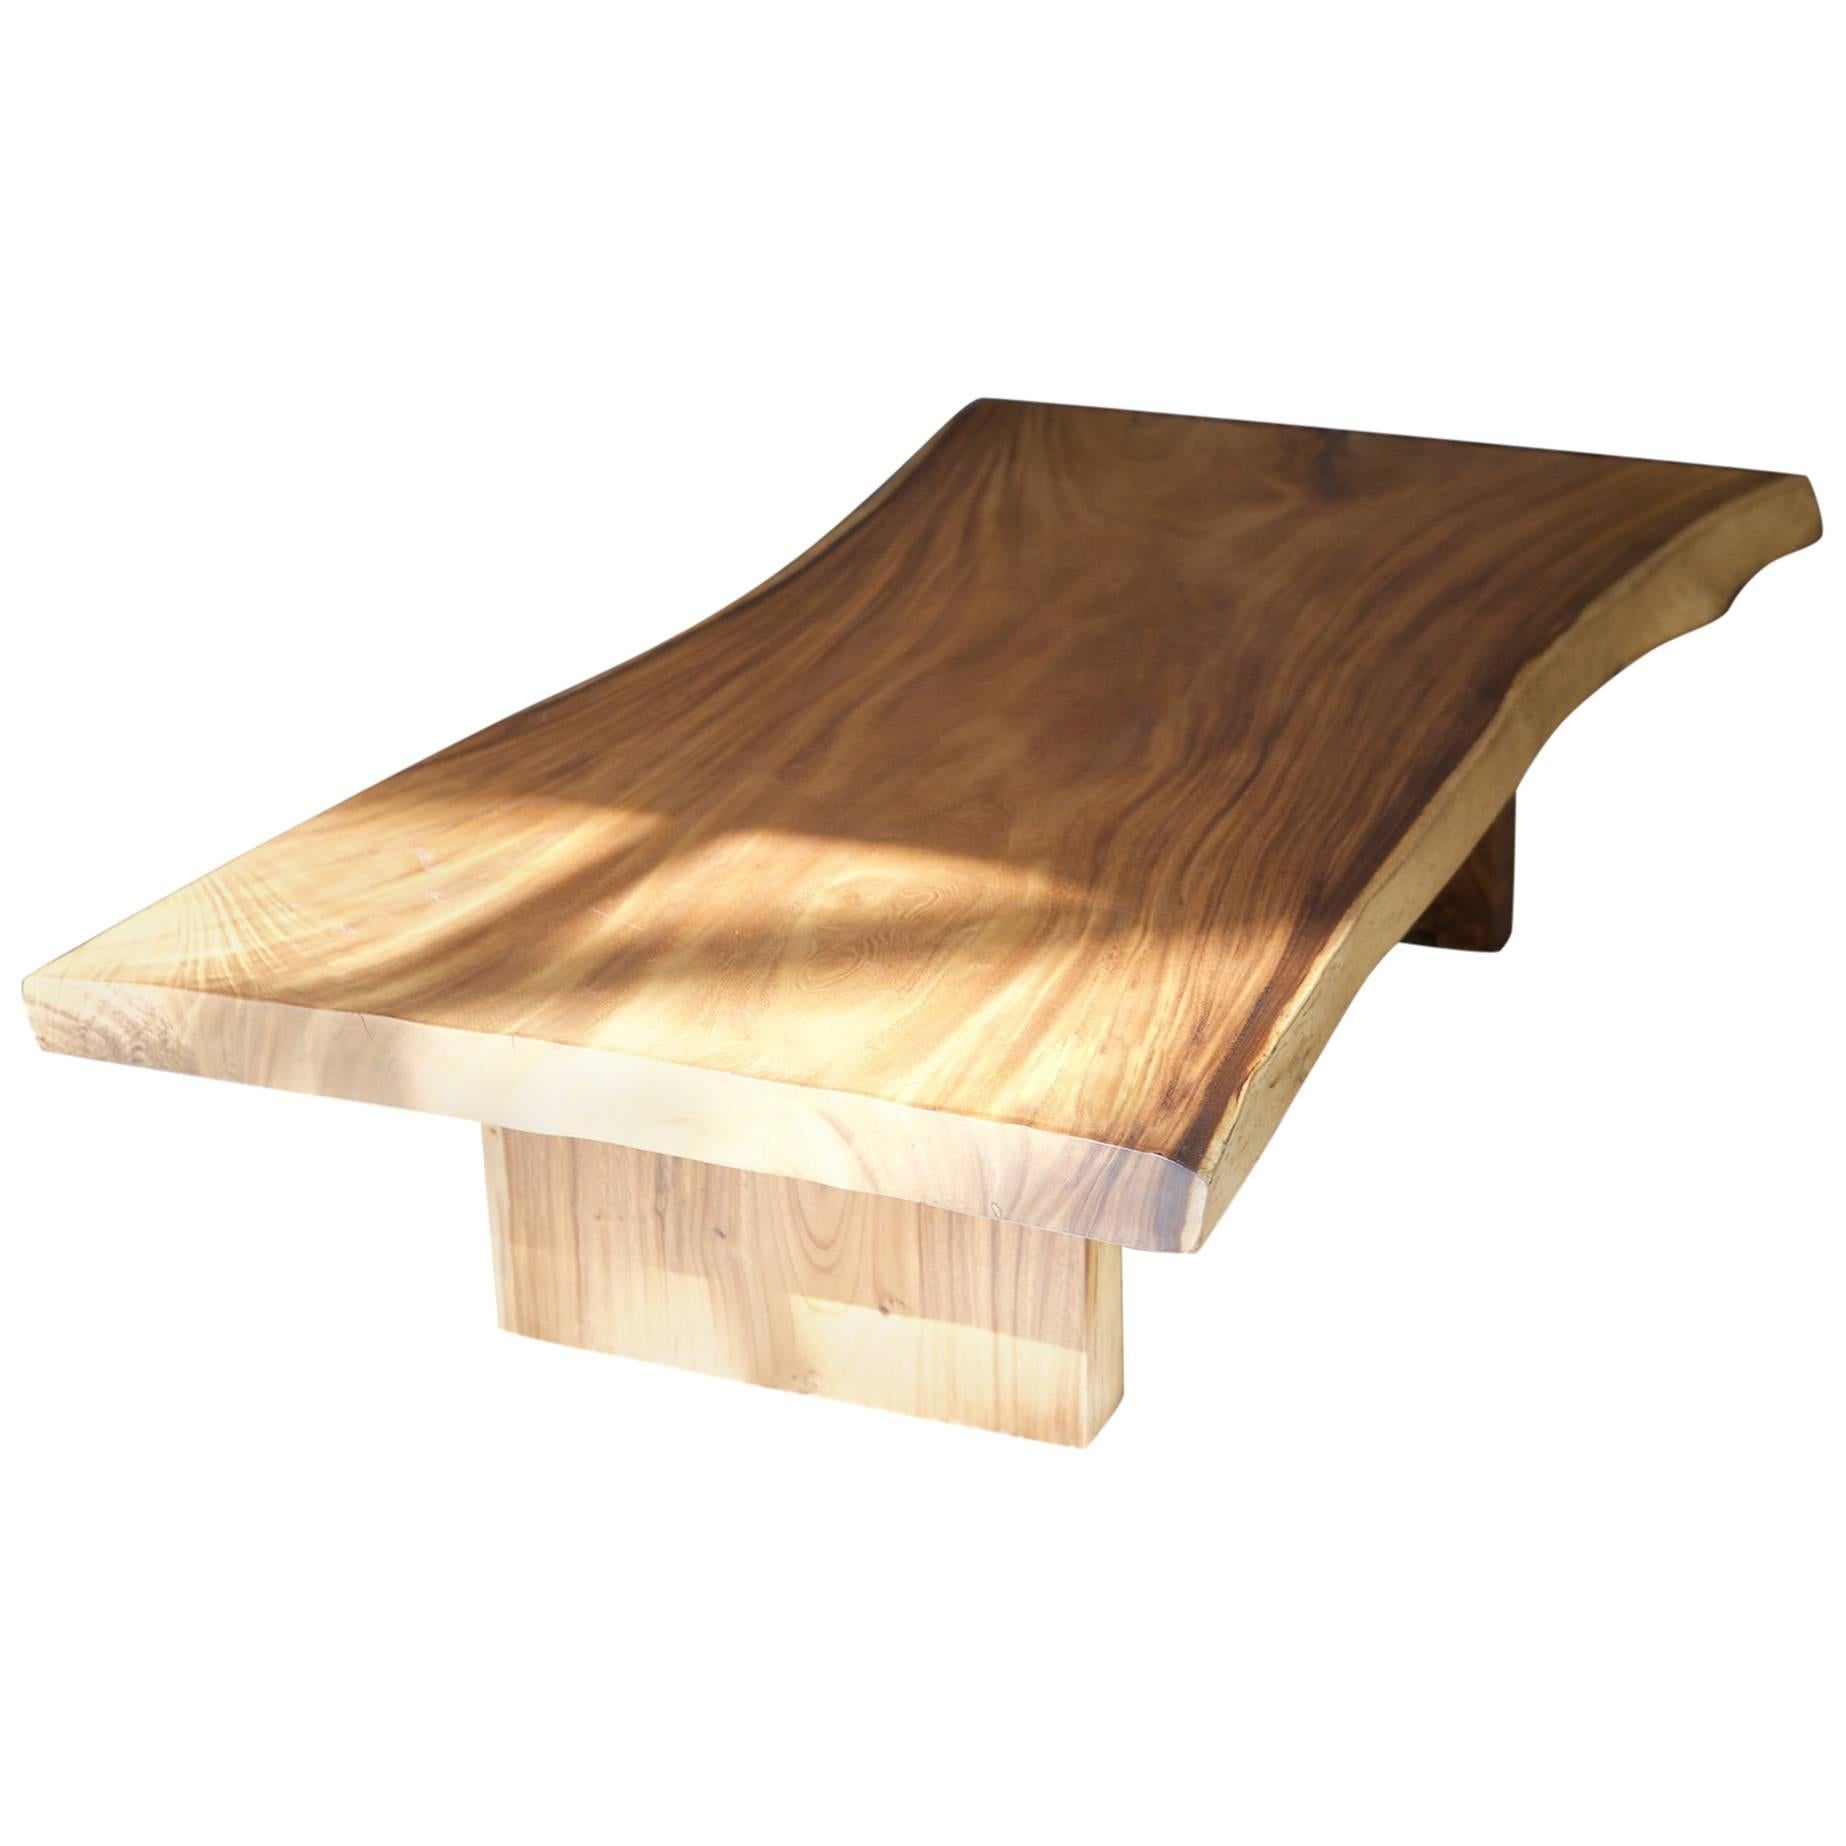 Contemporary Wooden Coffee Table, Solid Mahogany from Indonesia For Sale